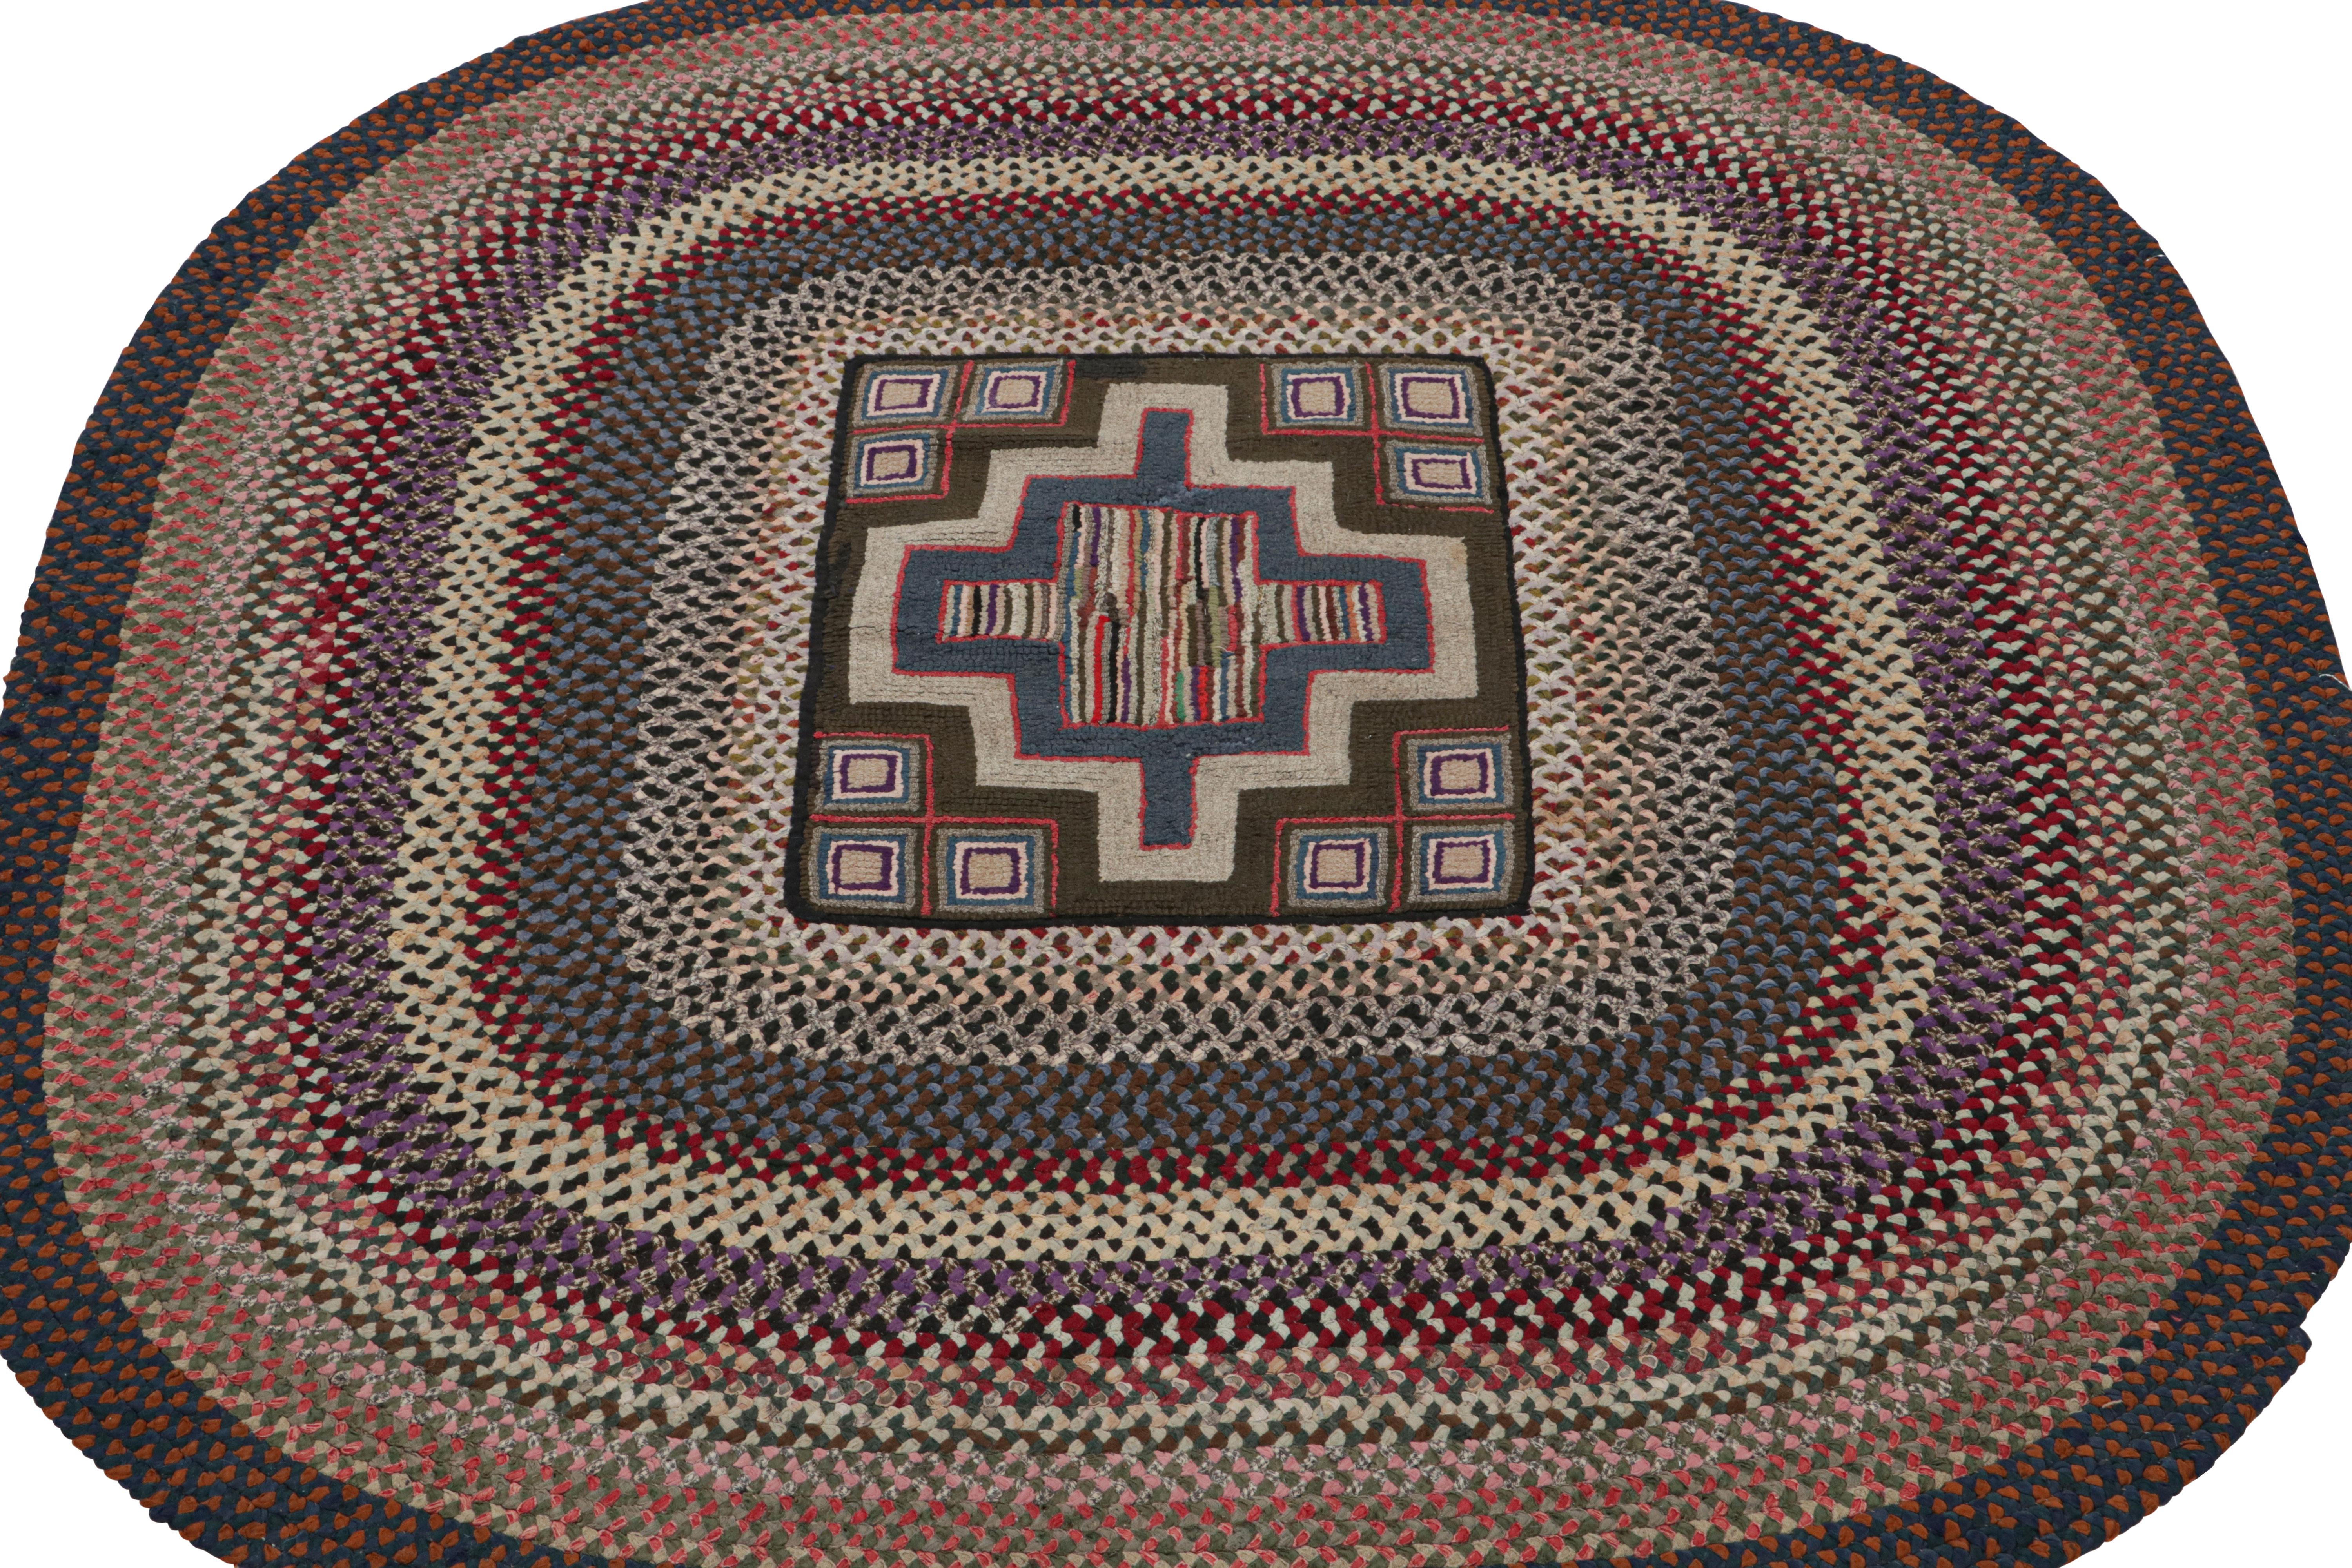 American Antique Hooked Oval Rug with Stripes and Geometric Patterns, from Rug & Kilim For Sale